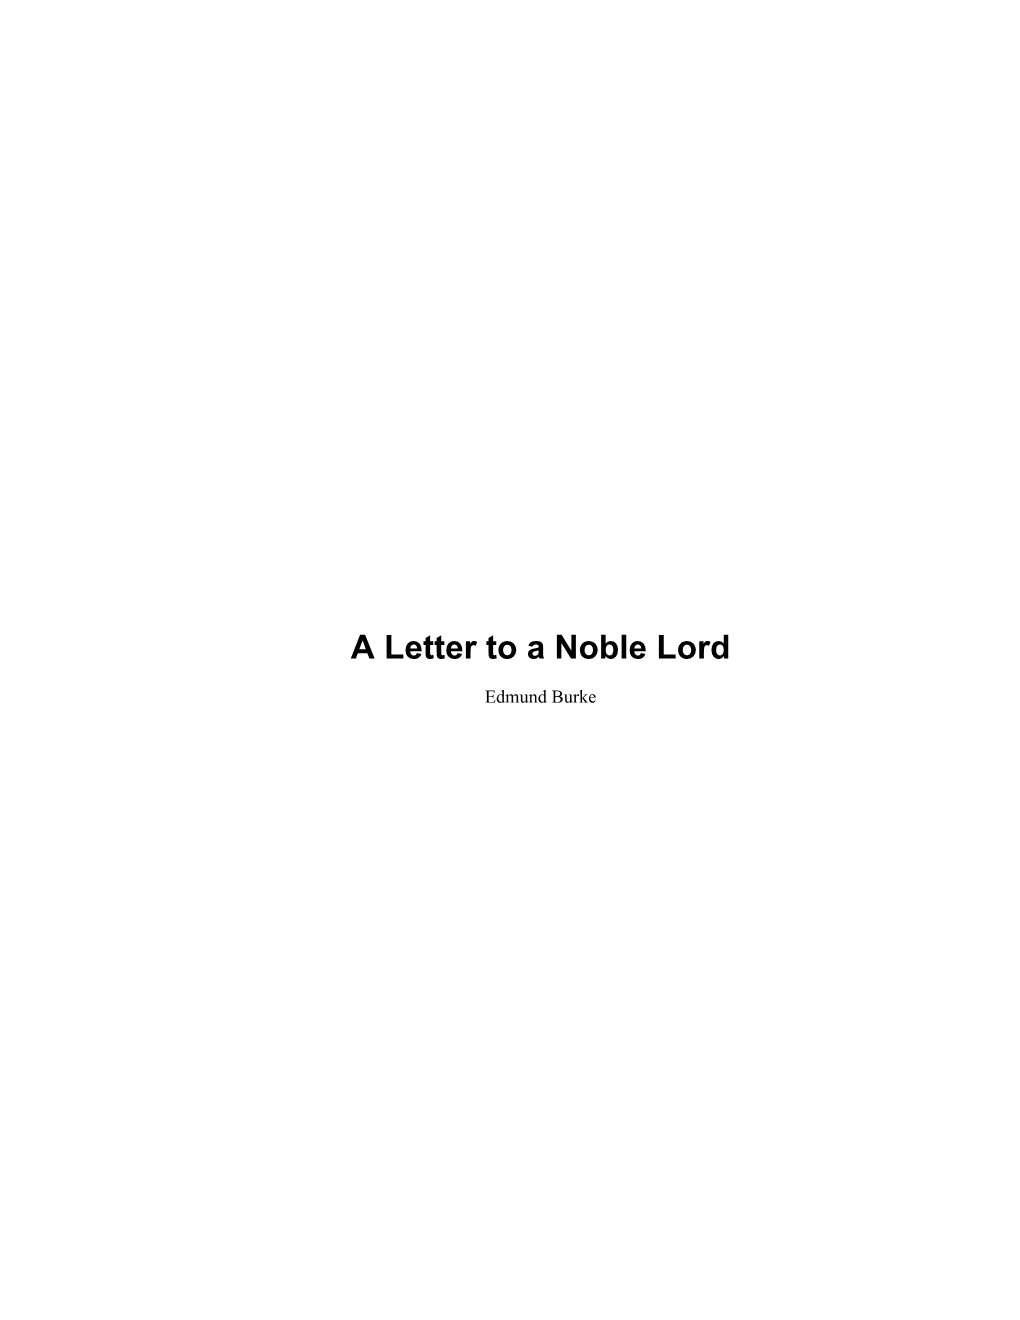 A Letter to a Noble Lord